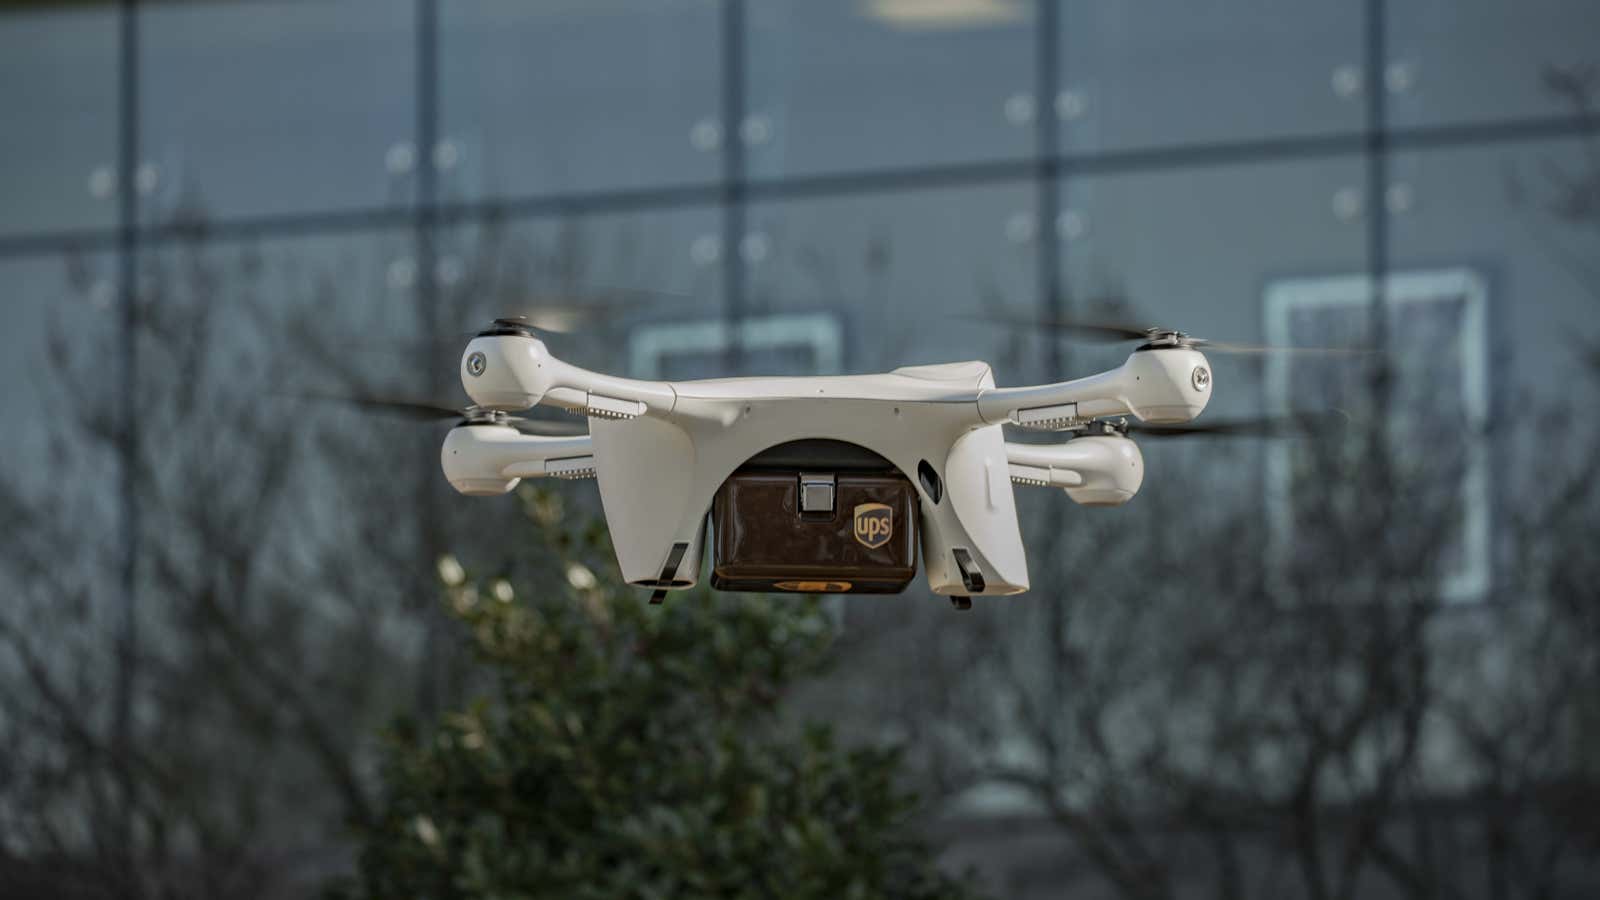 A Matternet drone carries a UPS delivery in North Carolina.